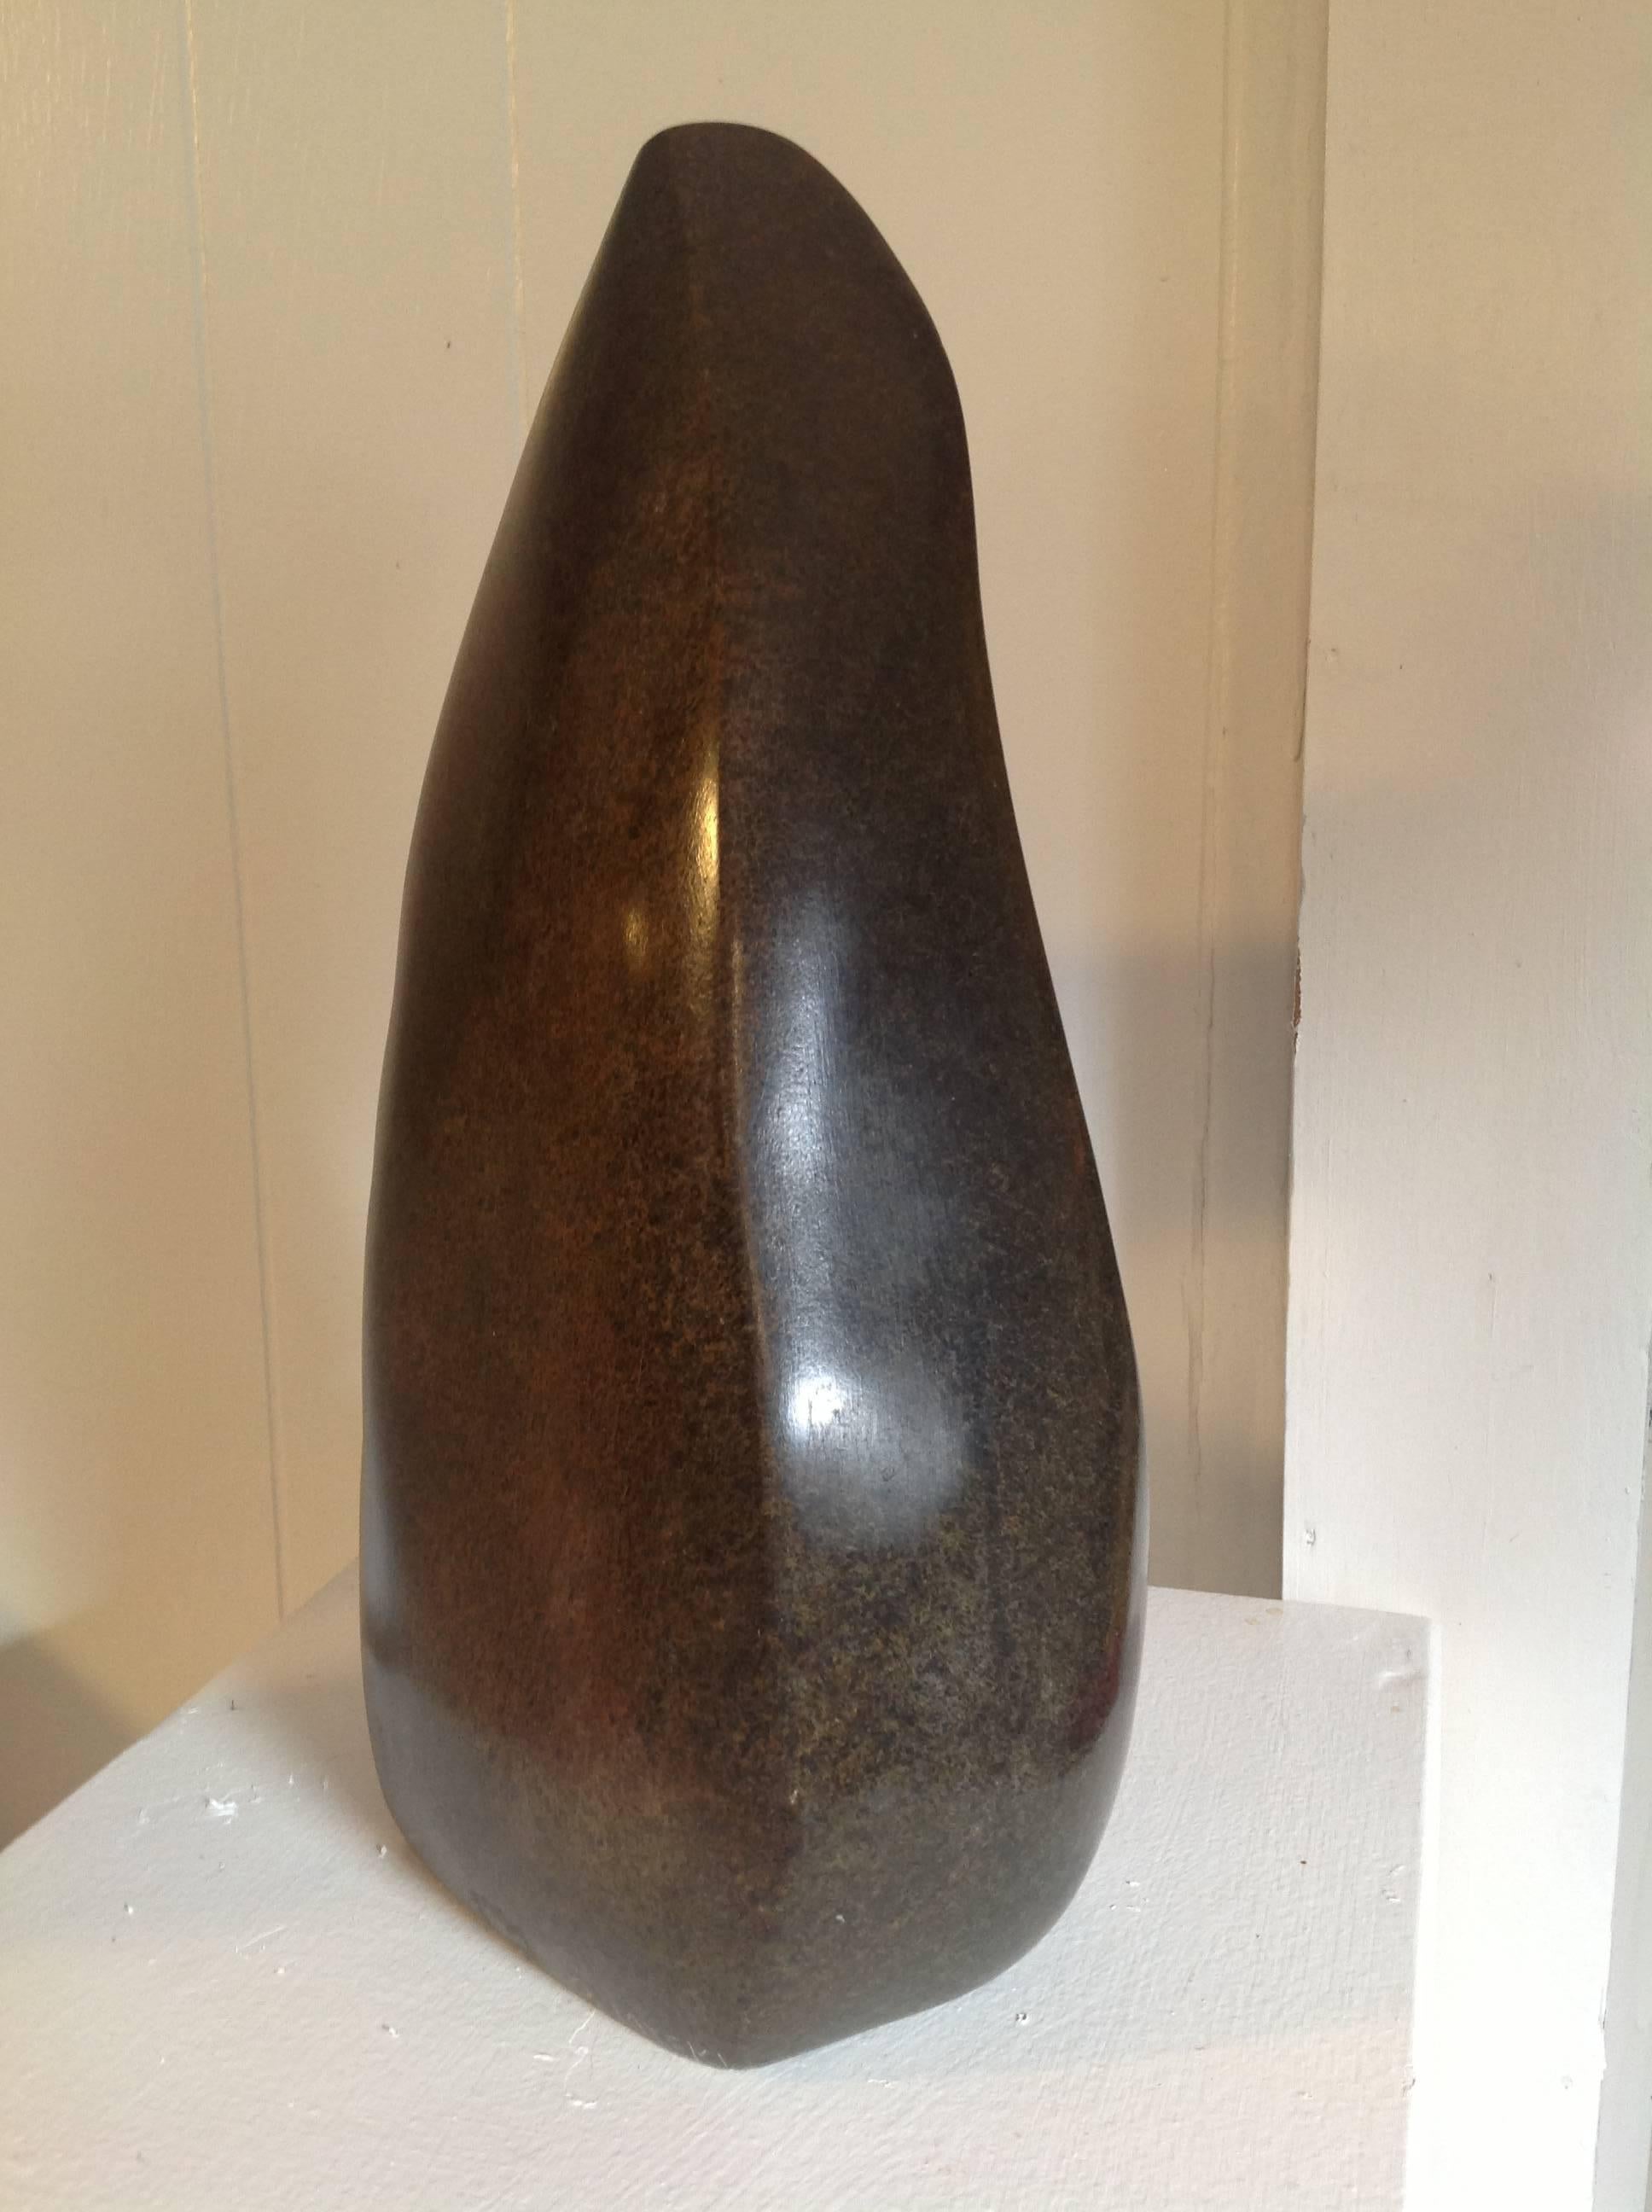 Gorgeous Shona modern abstract sculpture in a dark black Springstone Serpentine.

Richard Mteki was born in Harare, Zimbabwe in 1947. He is one of the most prominent sculptors of the Shona contemporary movement. He was commissioned by the